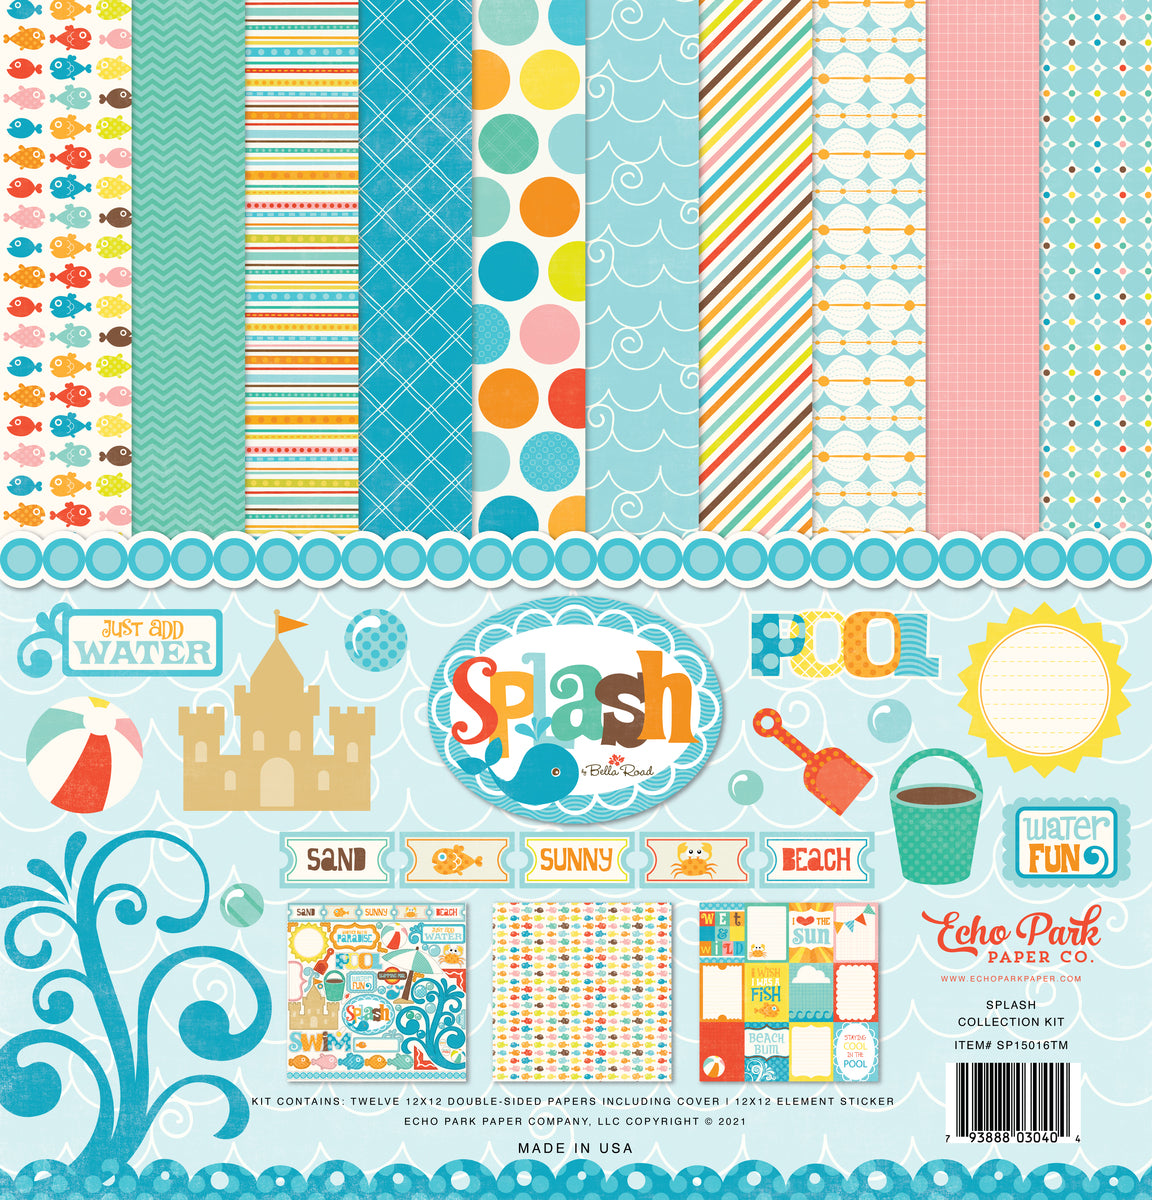 Splash - 12x12 collection kit with element sticker featuring summer colors and theme - Echo Park Paper